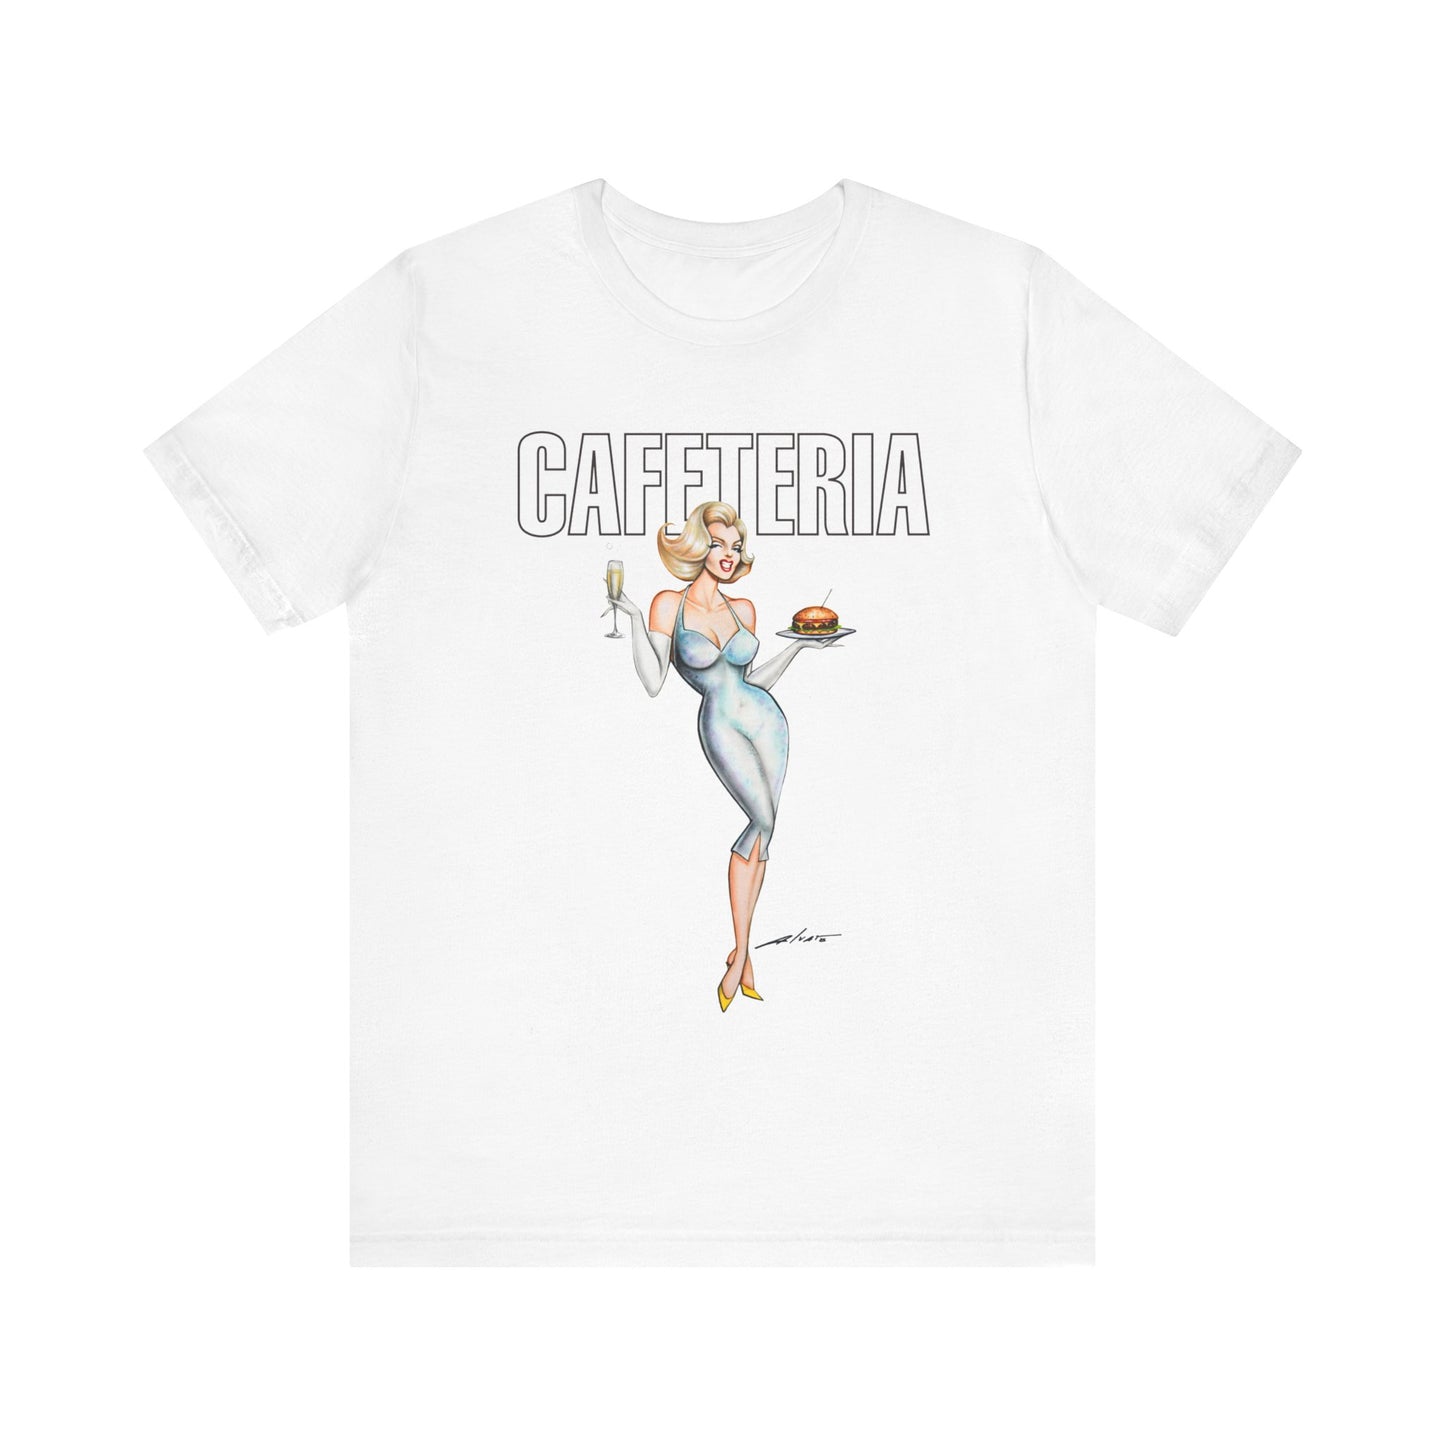 The Bombshell Limited Edition Tee by Alvaro